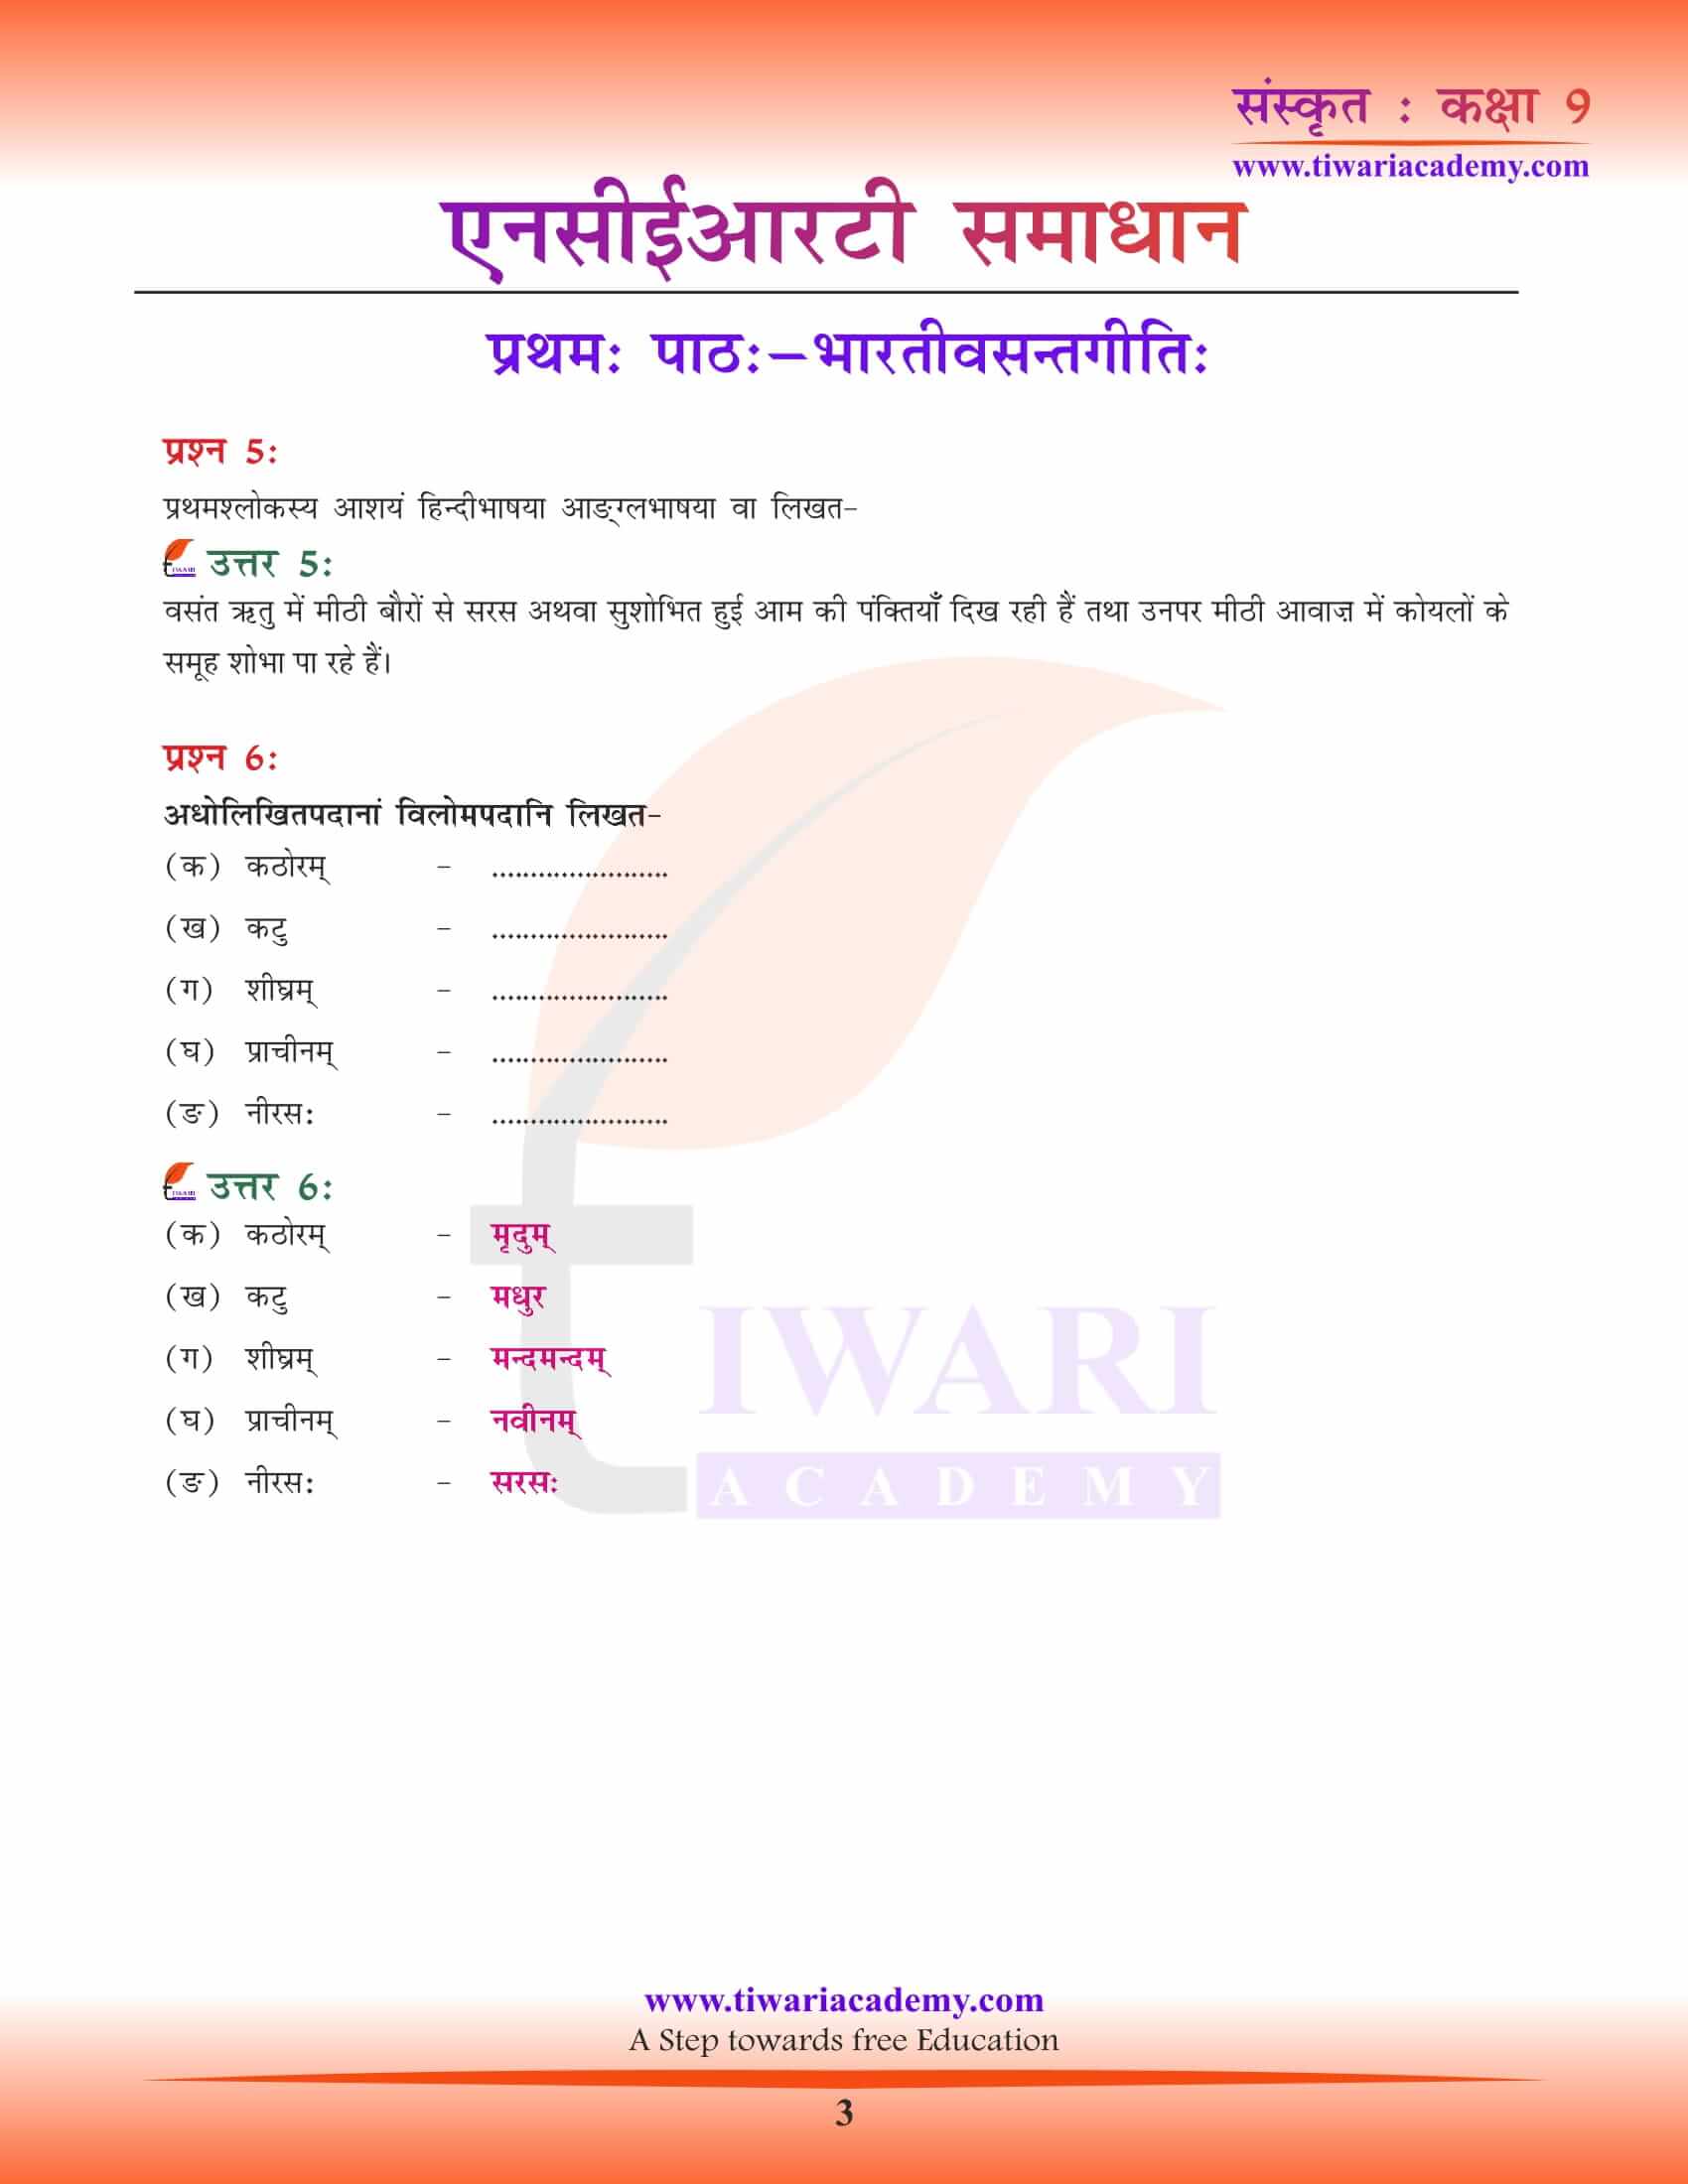 NCERT Solutions for Class 9 Sanskrit Chapter 1 all answers